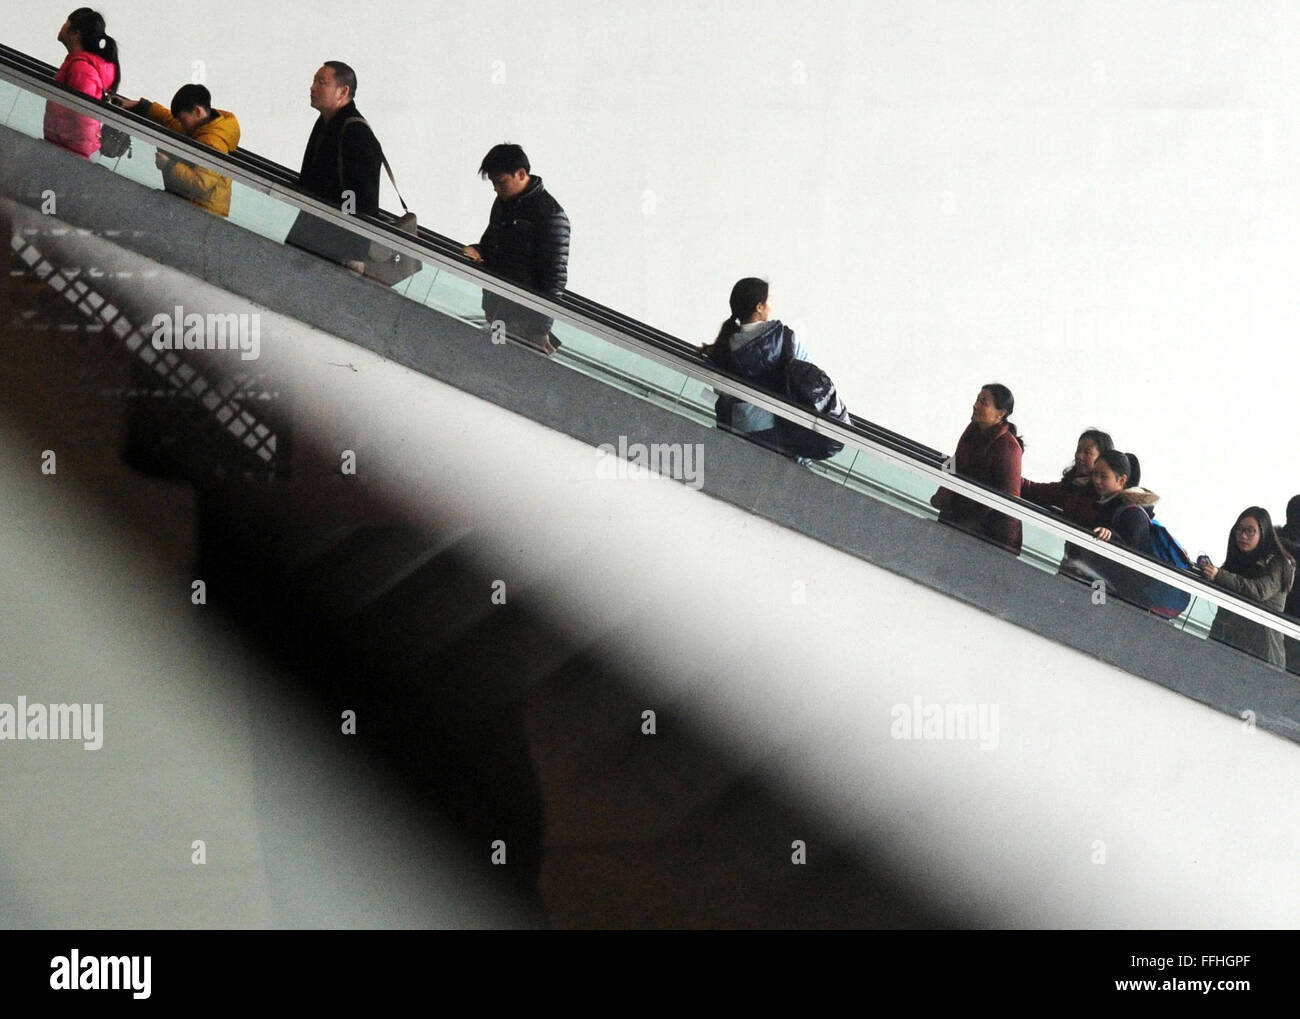 Suzhou, China's Jiangsu Province. 13th Feb, 2016. Passengers take an escalator to a waiting room at the railway station of Suzhou, east China's Jiangsu Province, Feb. 13, 2016. Chinese passengers made a record number of trips during the Spring Festival holiday, according to the Ministry of Transport (MOT) on Sunday. Passenger trips reached 400 million from Feb. 7 to 13, up 6.7 percent from last year, MOT data showed. Over 47 million trips were made by rail, more than 333 million on road and about 8.5 million by air. Road trips were up by 7 percent. Credit:  Hang Xingwei/Xinhua/Alamy Live News Stock Photo